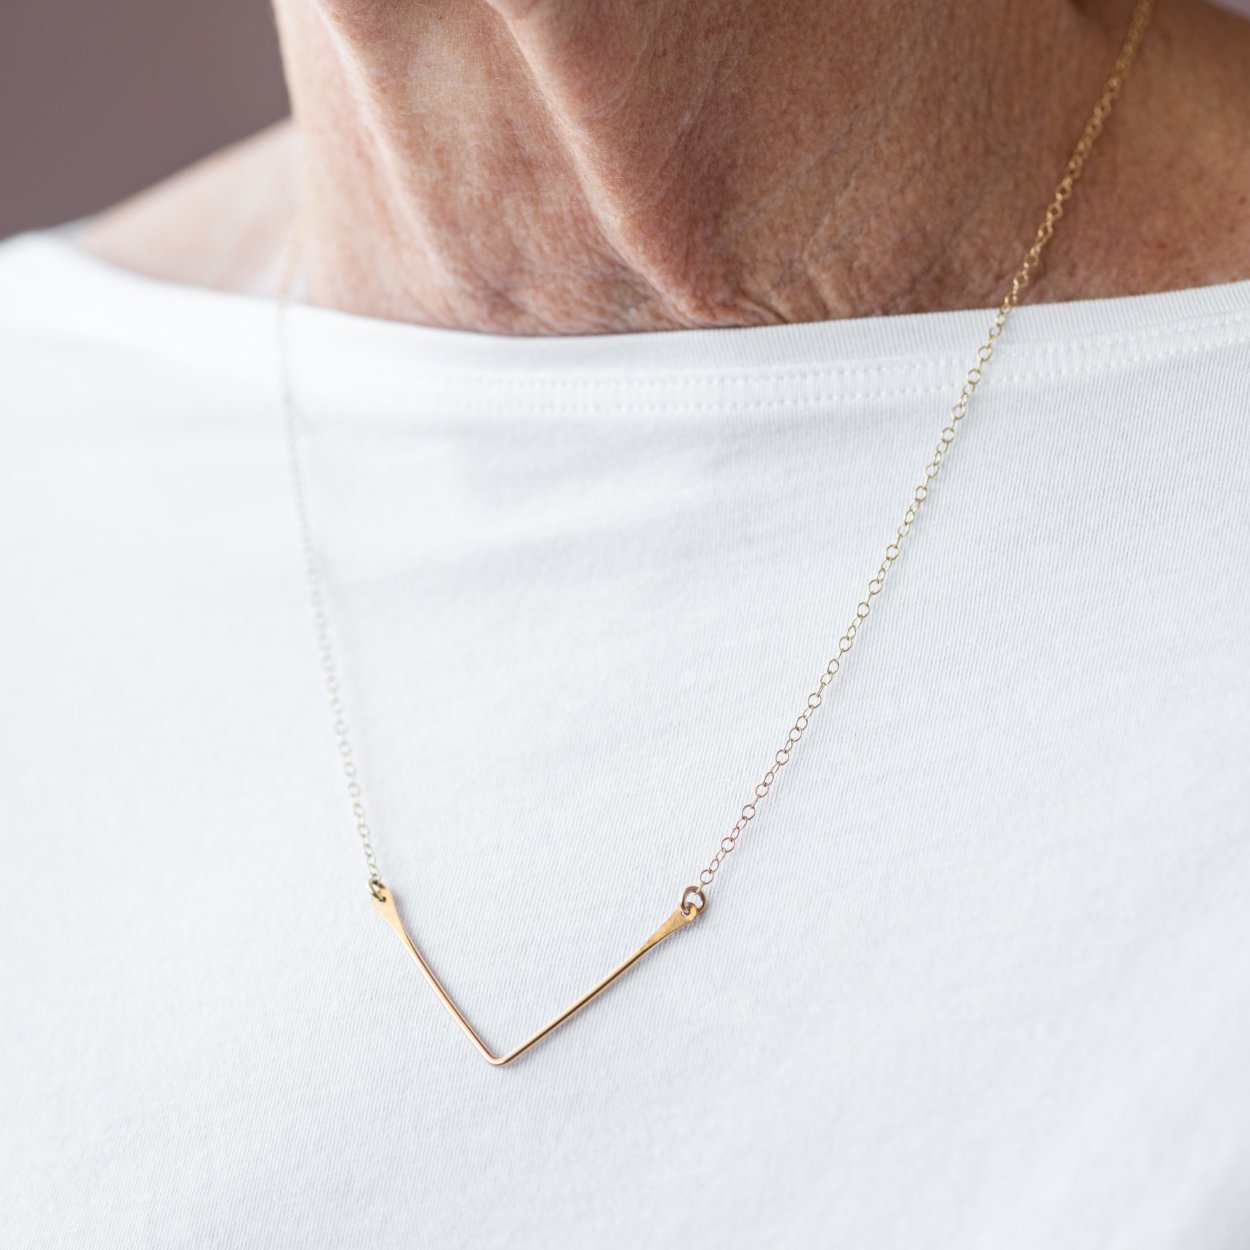 V Necklaces for Women Small Chevron Necklace 14k Gold Fill 